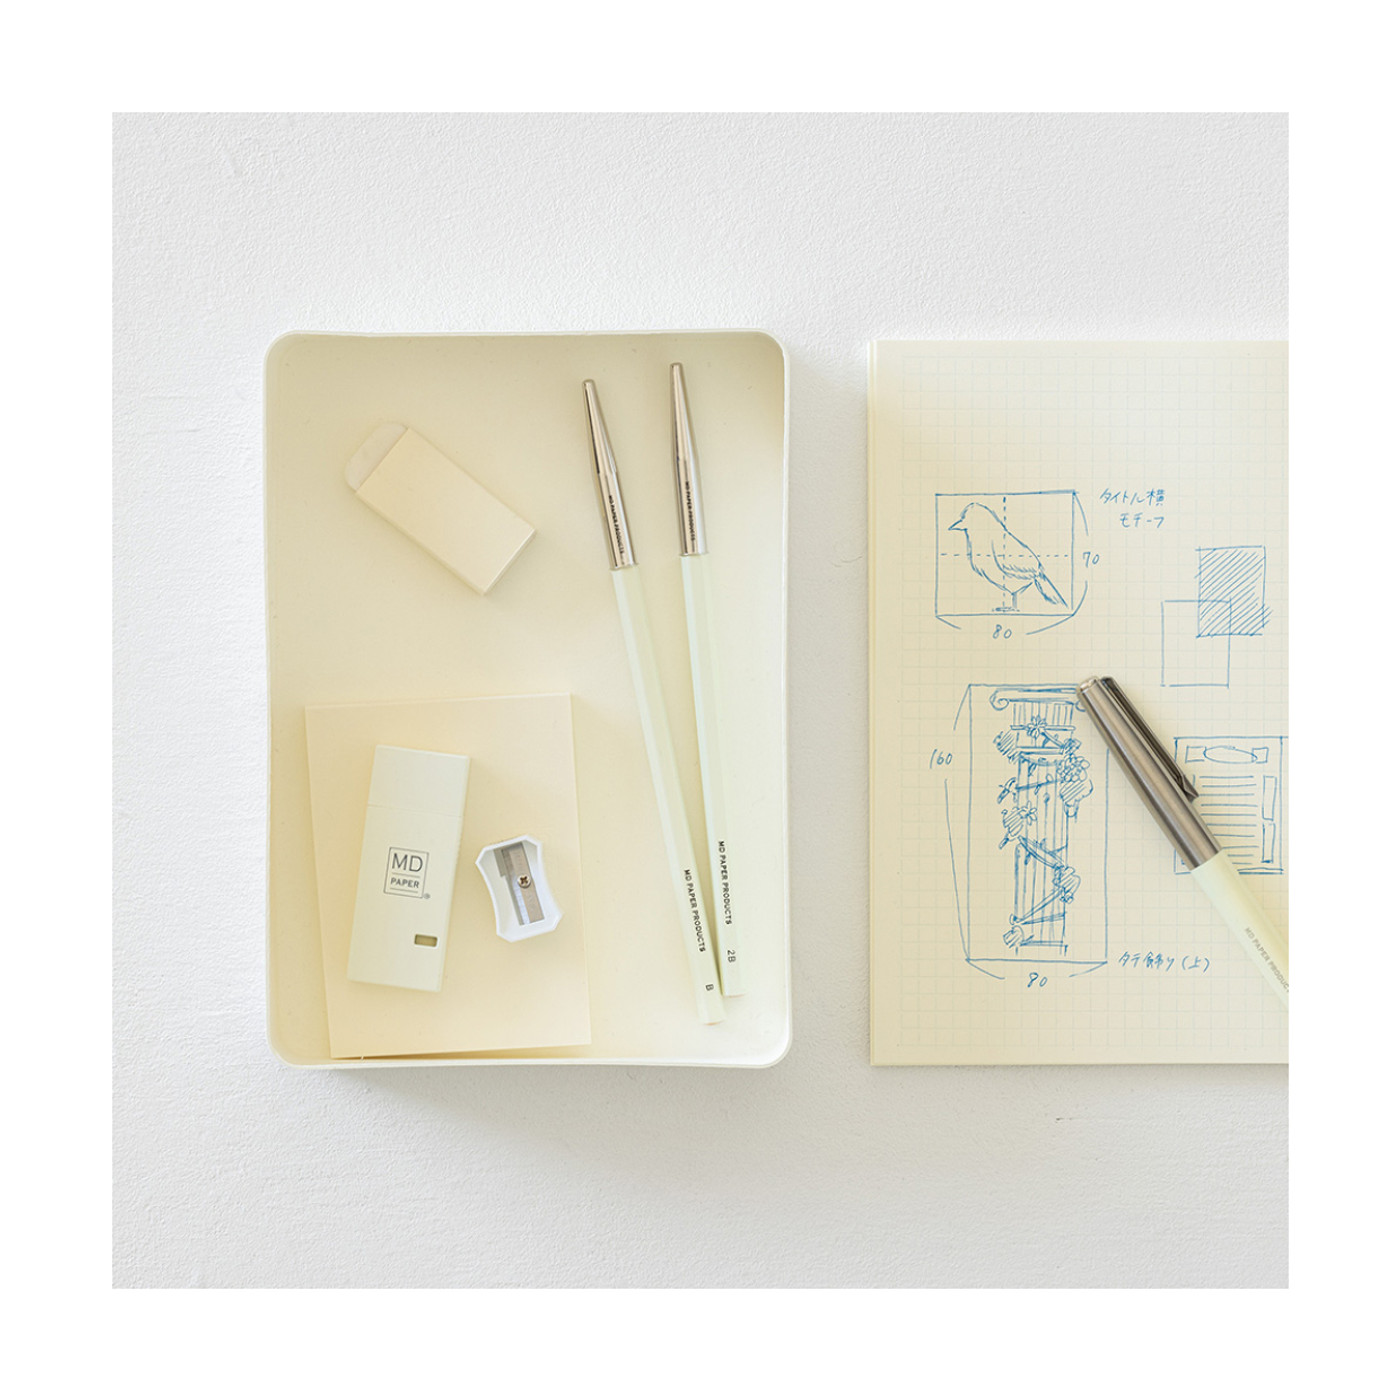 MD Paper Tool Box - 15th Anniversary LIMITED EDITION